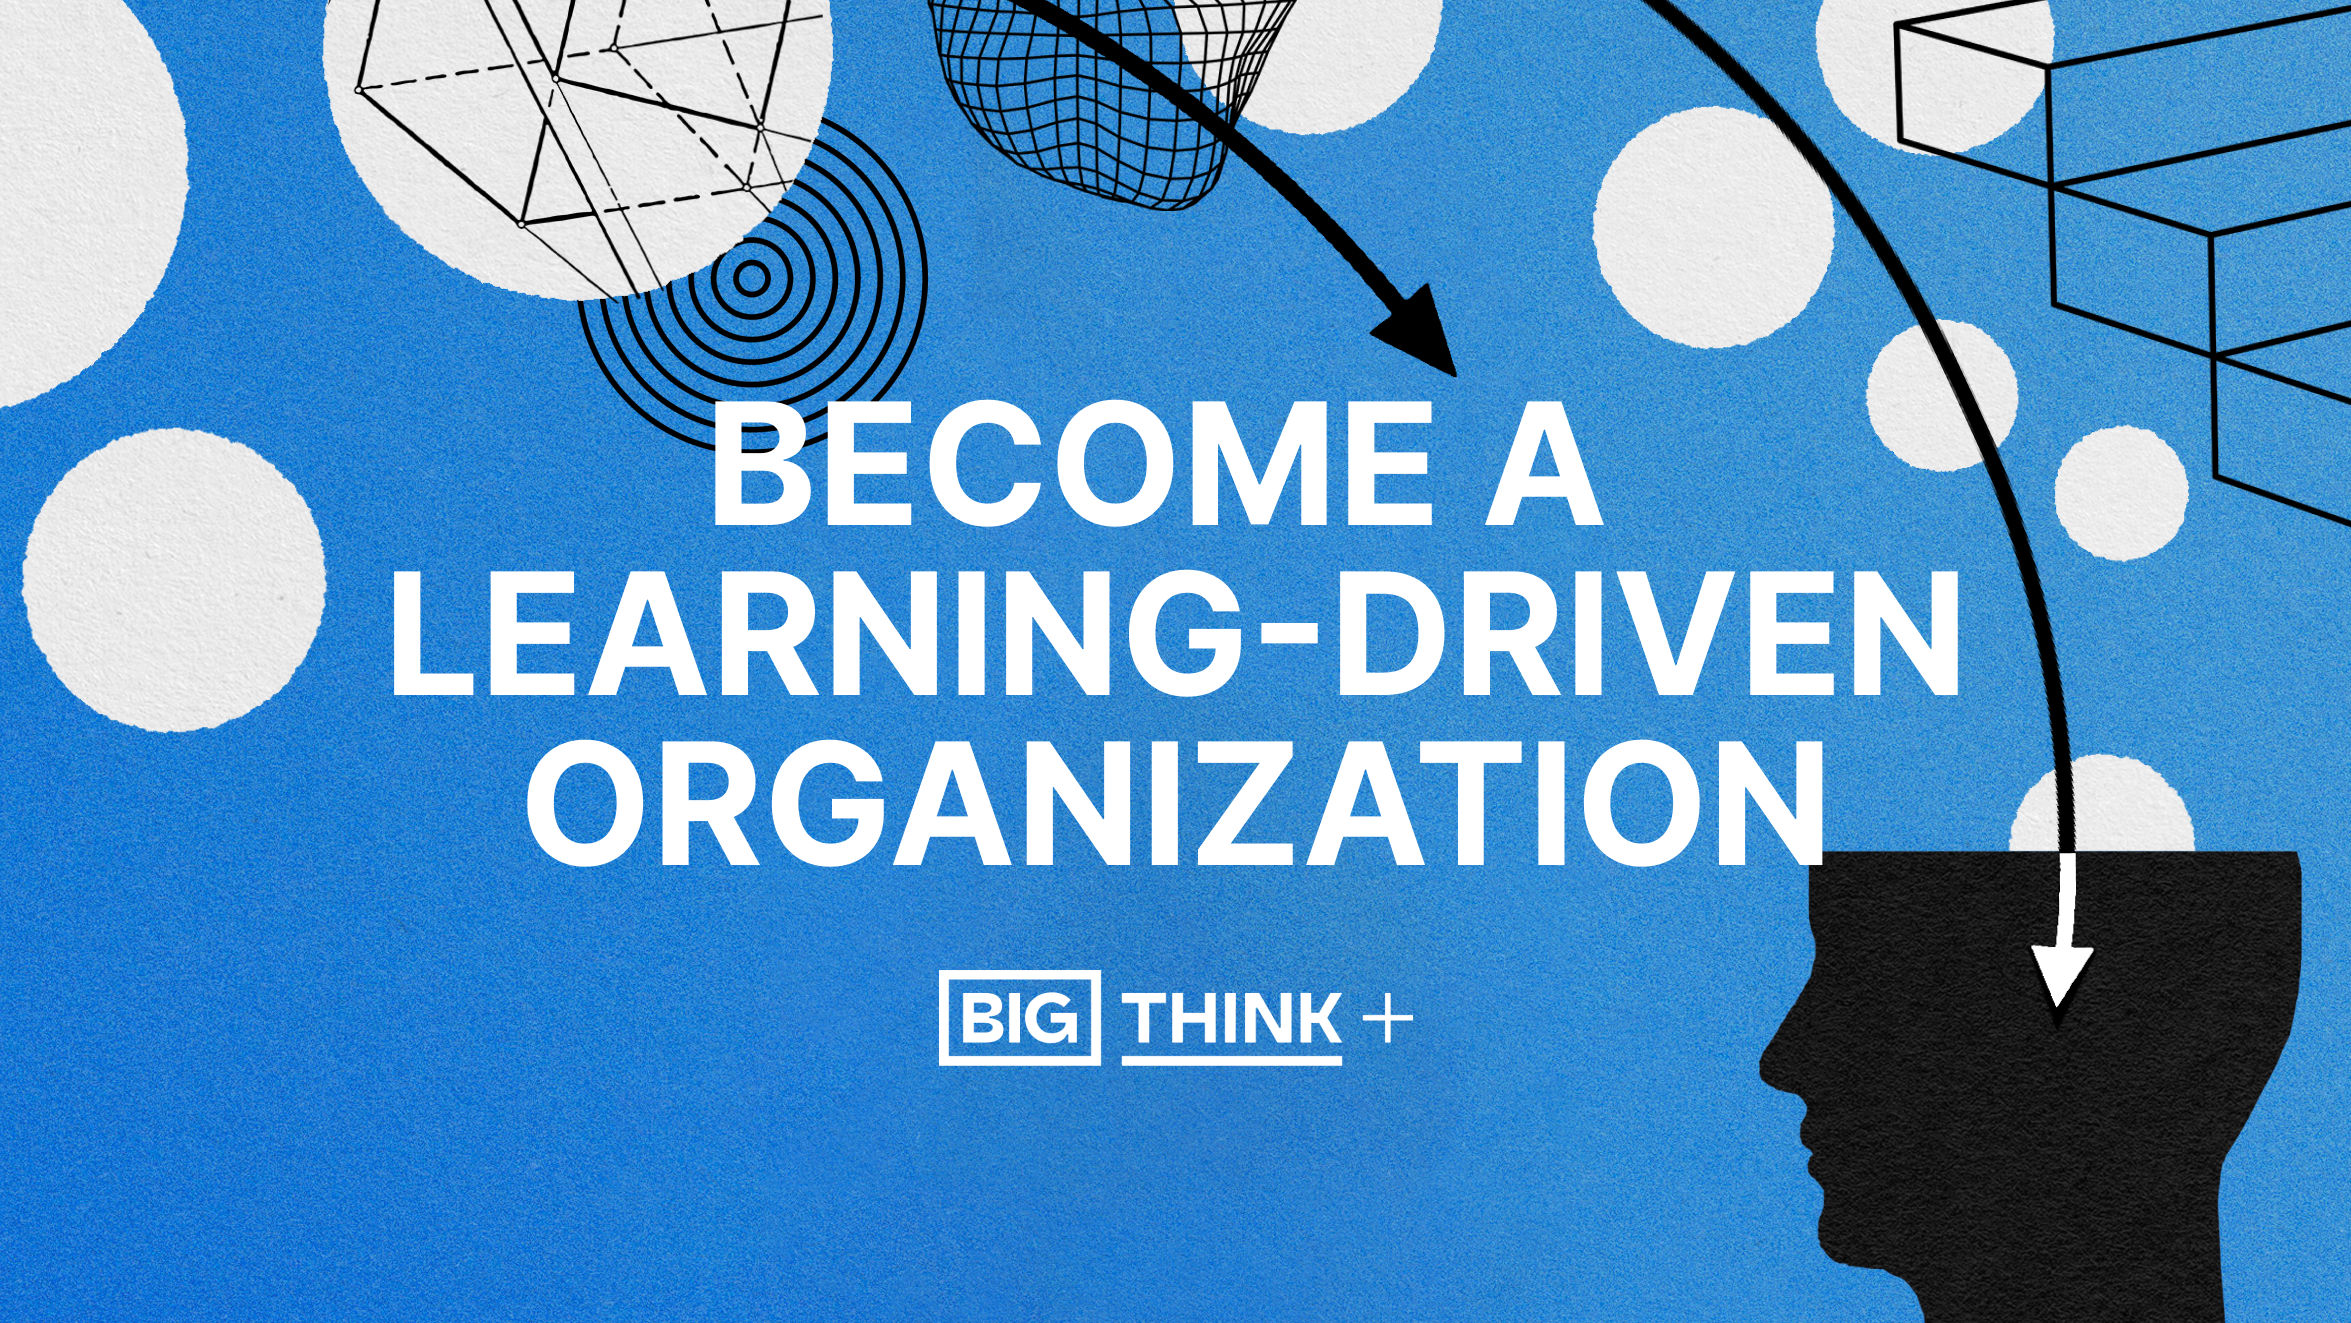 Become a learning-driven organization.